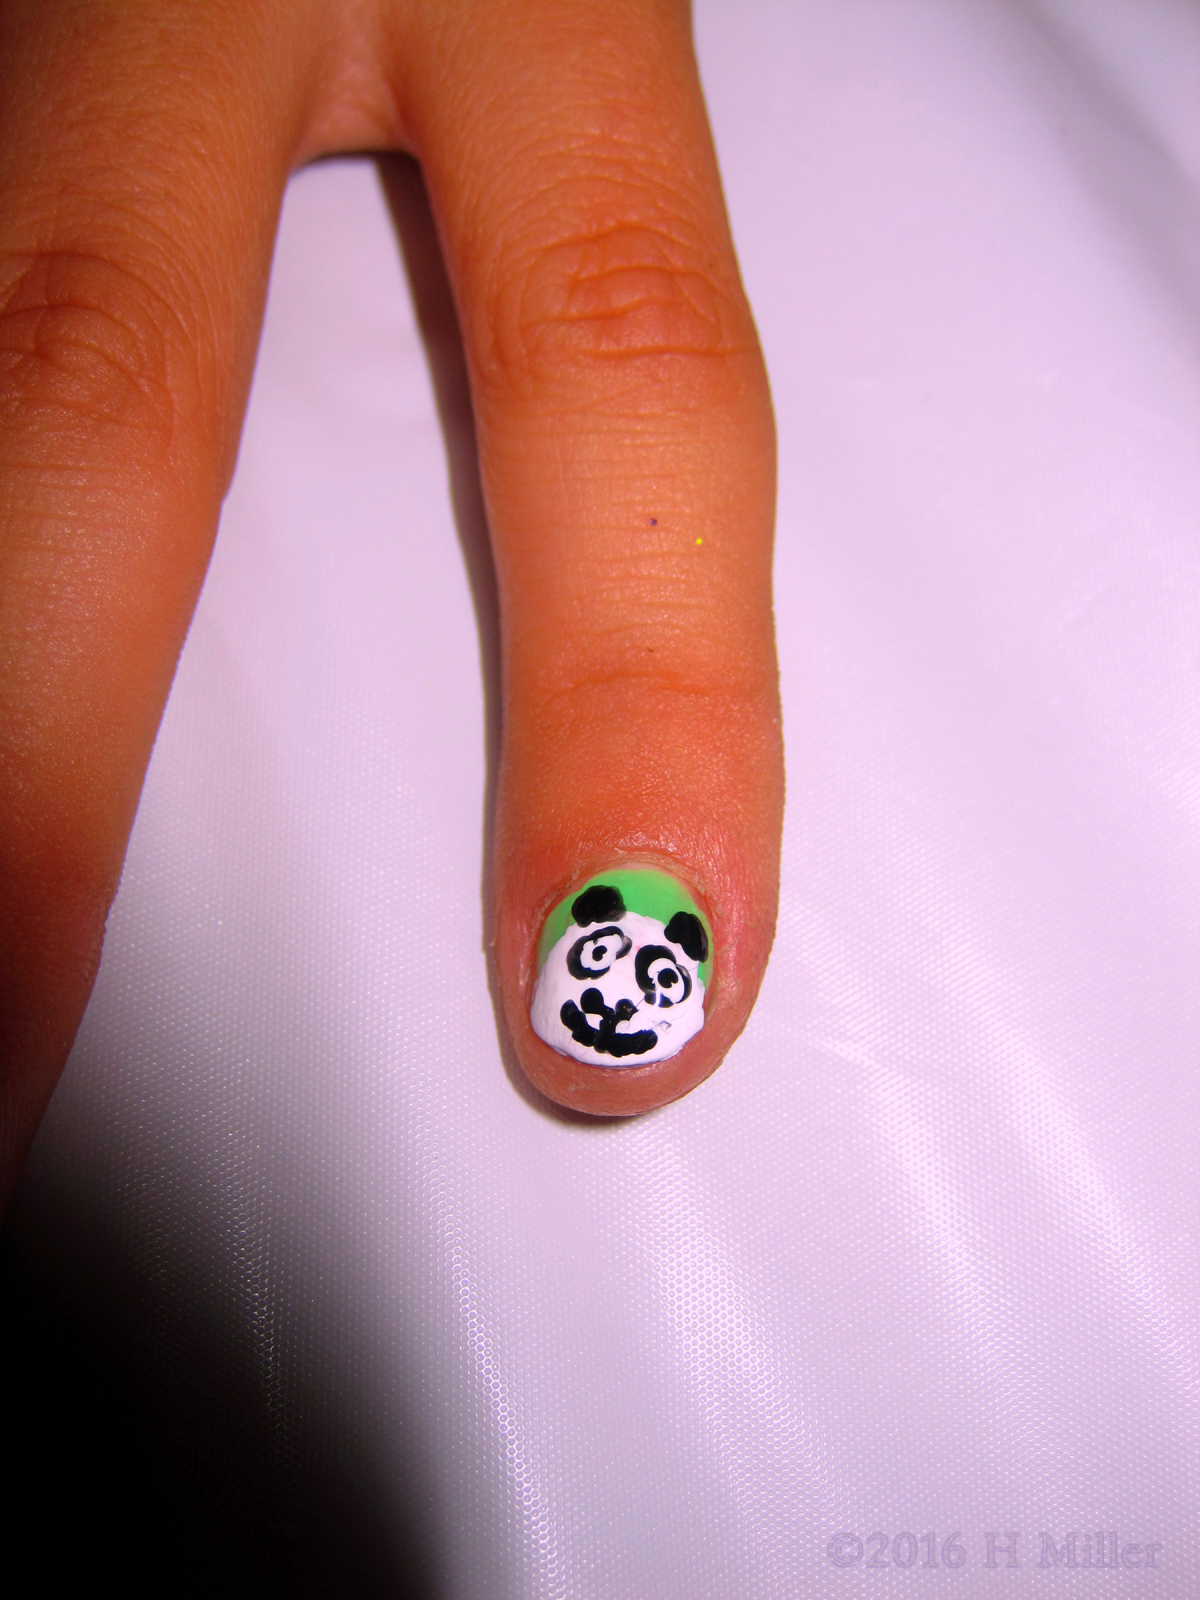 A Cute Panda Bear With Googly Eyes Nail Design For Her Girls Manicure! 